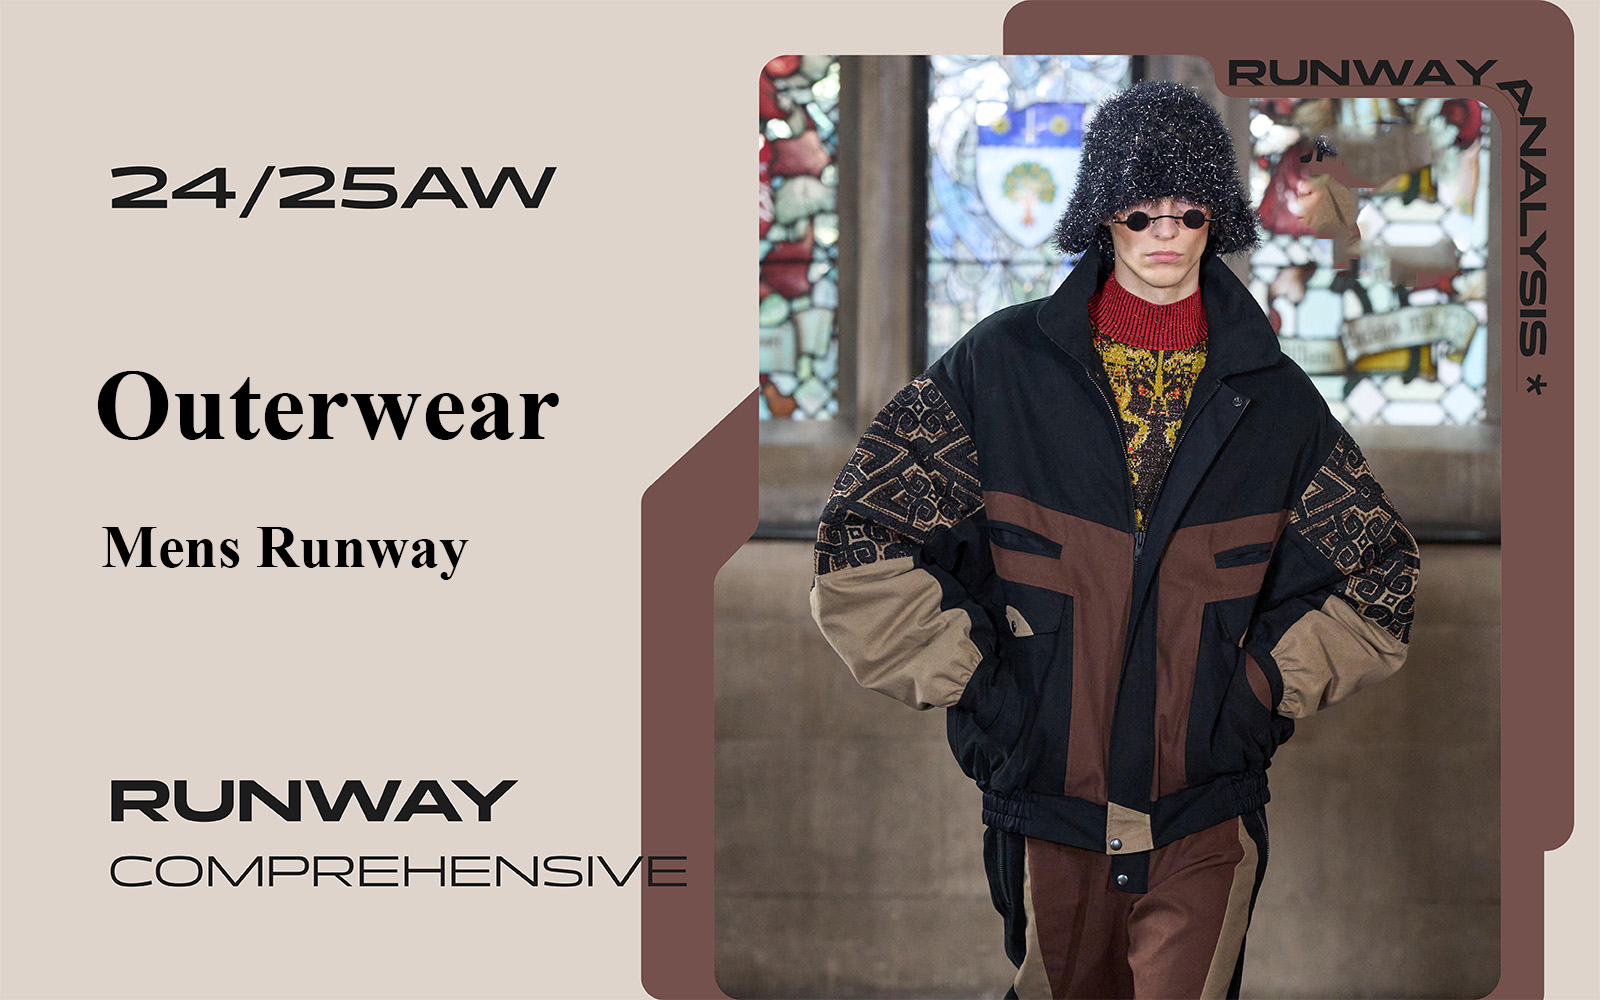 Outerwear -- The Comprehensive Analysis of Men's Runway